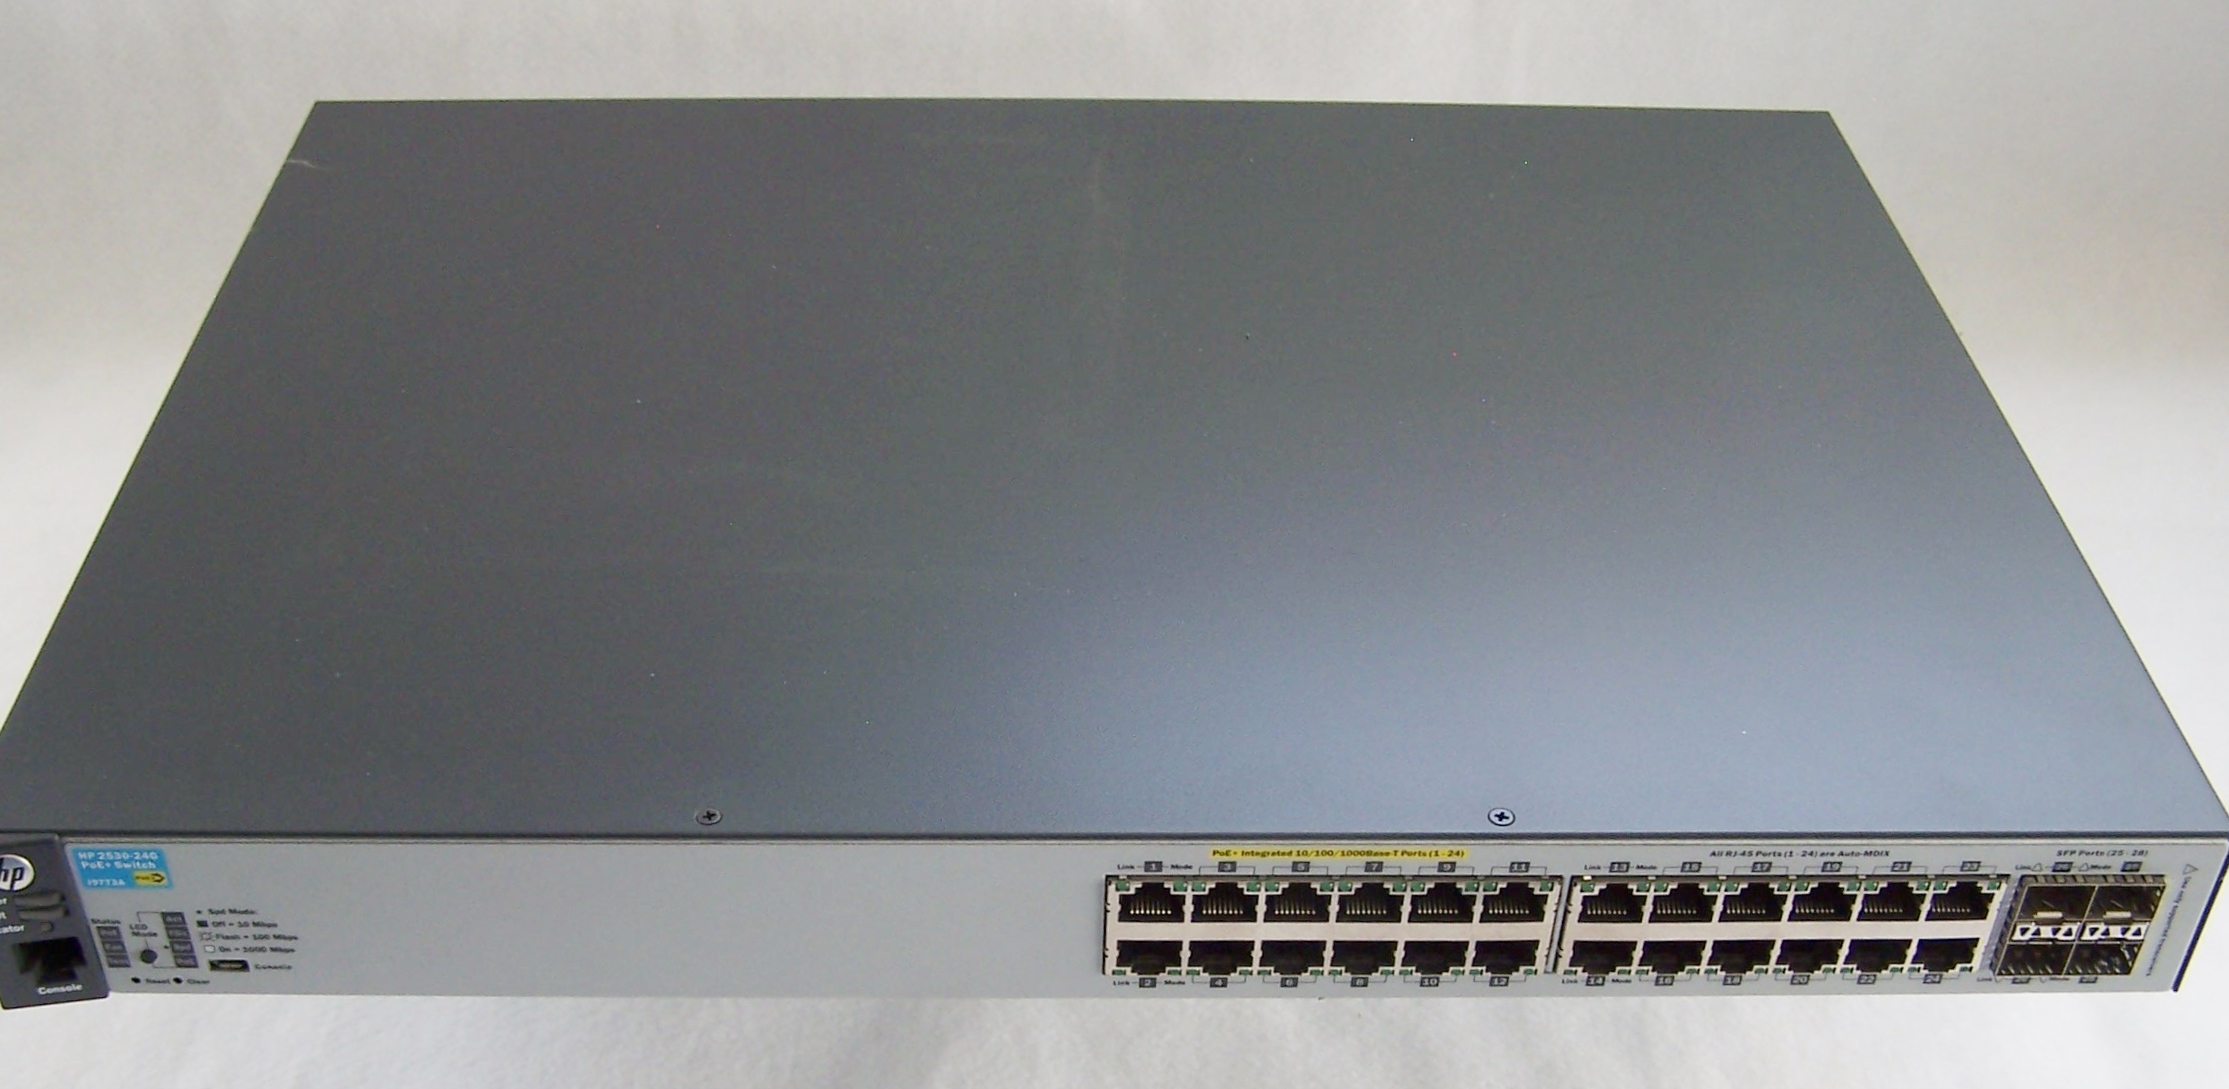 NEW - J9773A - HP 2530-24G-PoE+ Switch